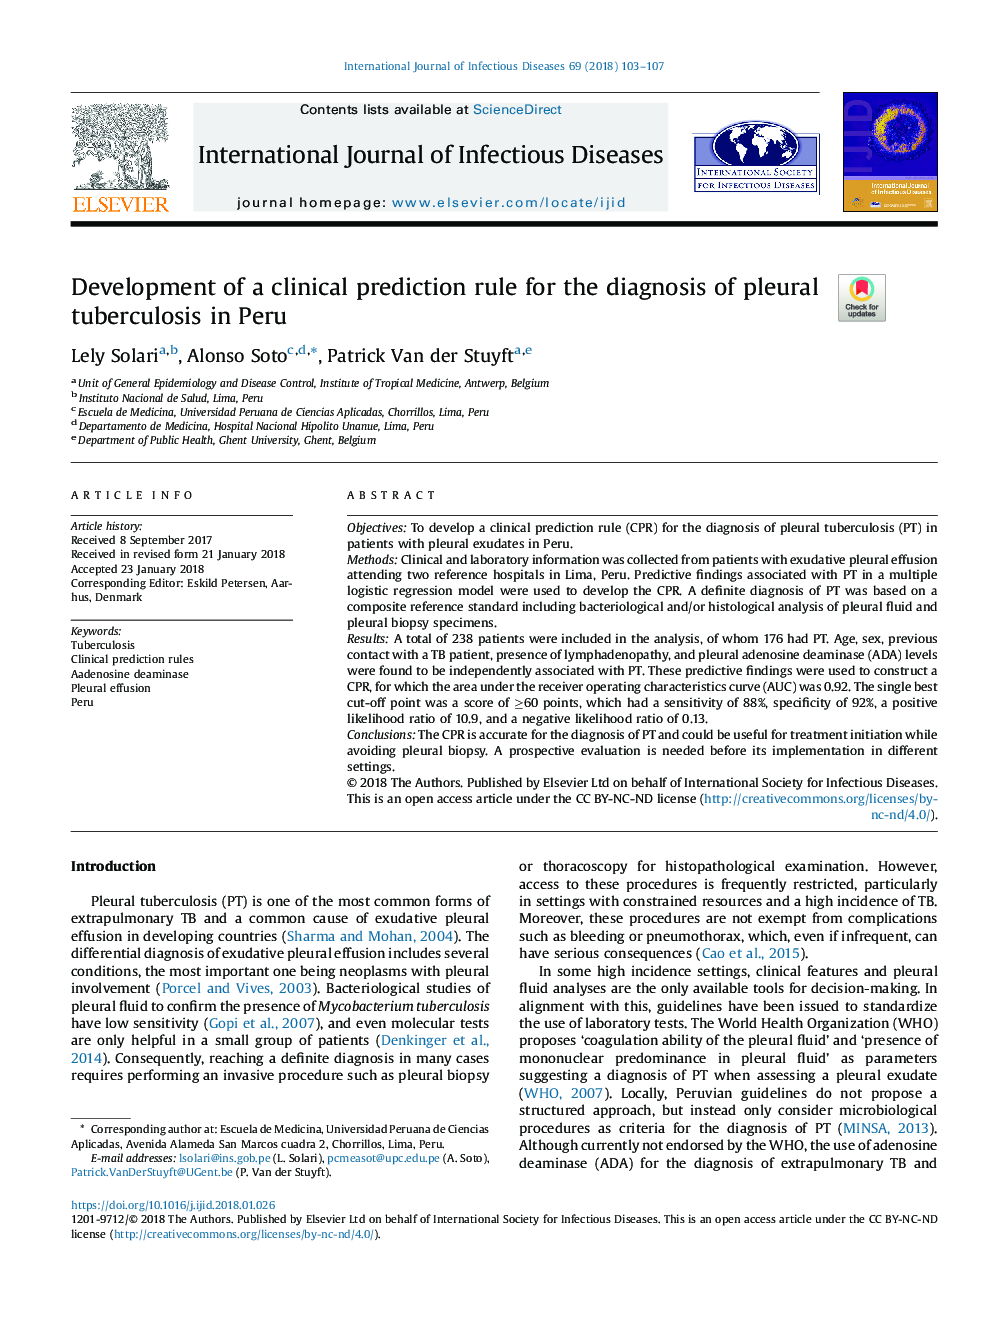 Development of a clinical prediction rule for the diagnosis of pleural tuberculosis in Peru